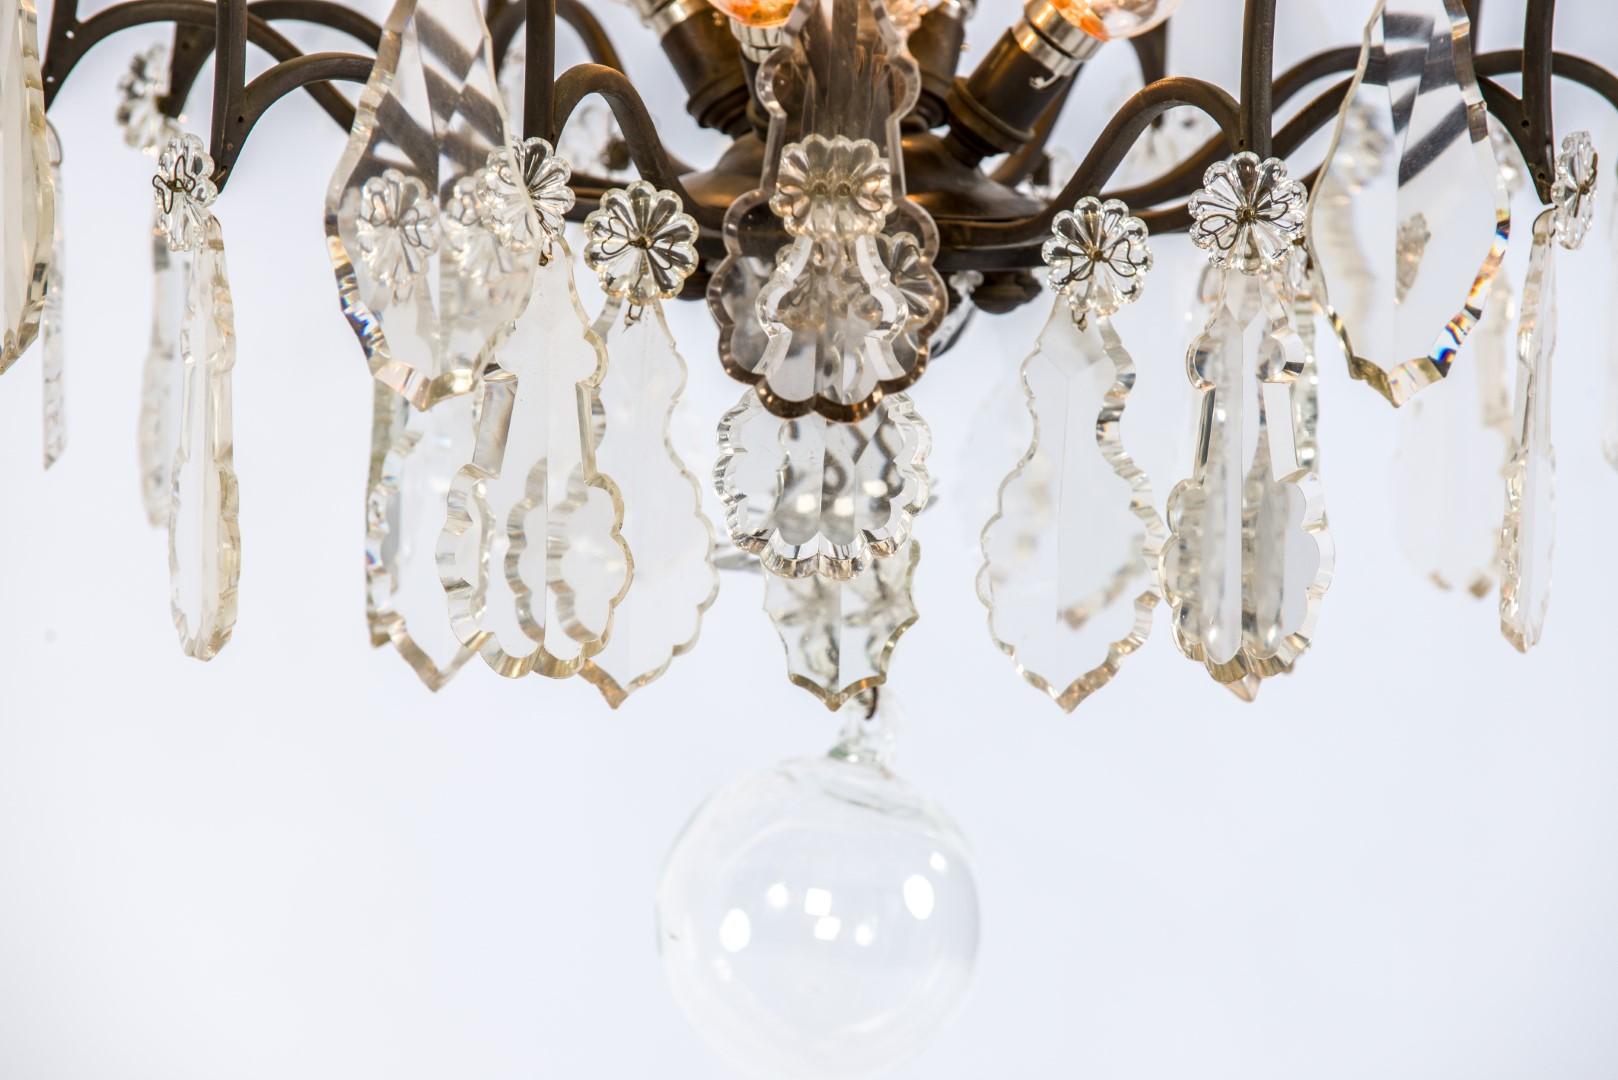 19th Century Bronze Chandelier with Cut Crystal Ornaments and Candles and Lights For Sale 7